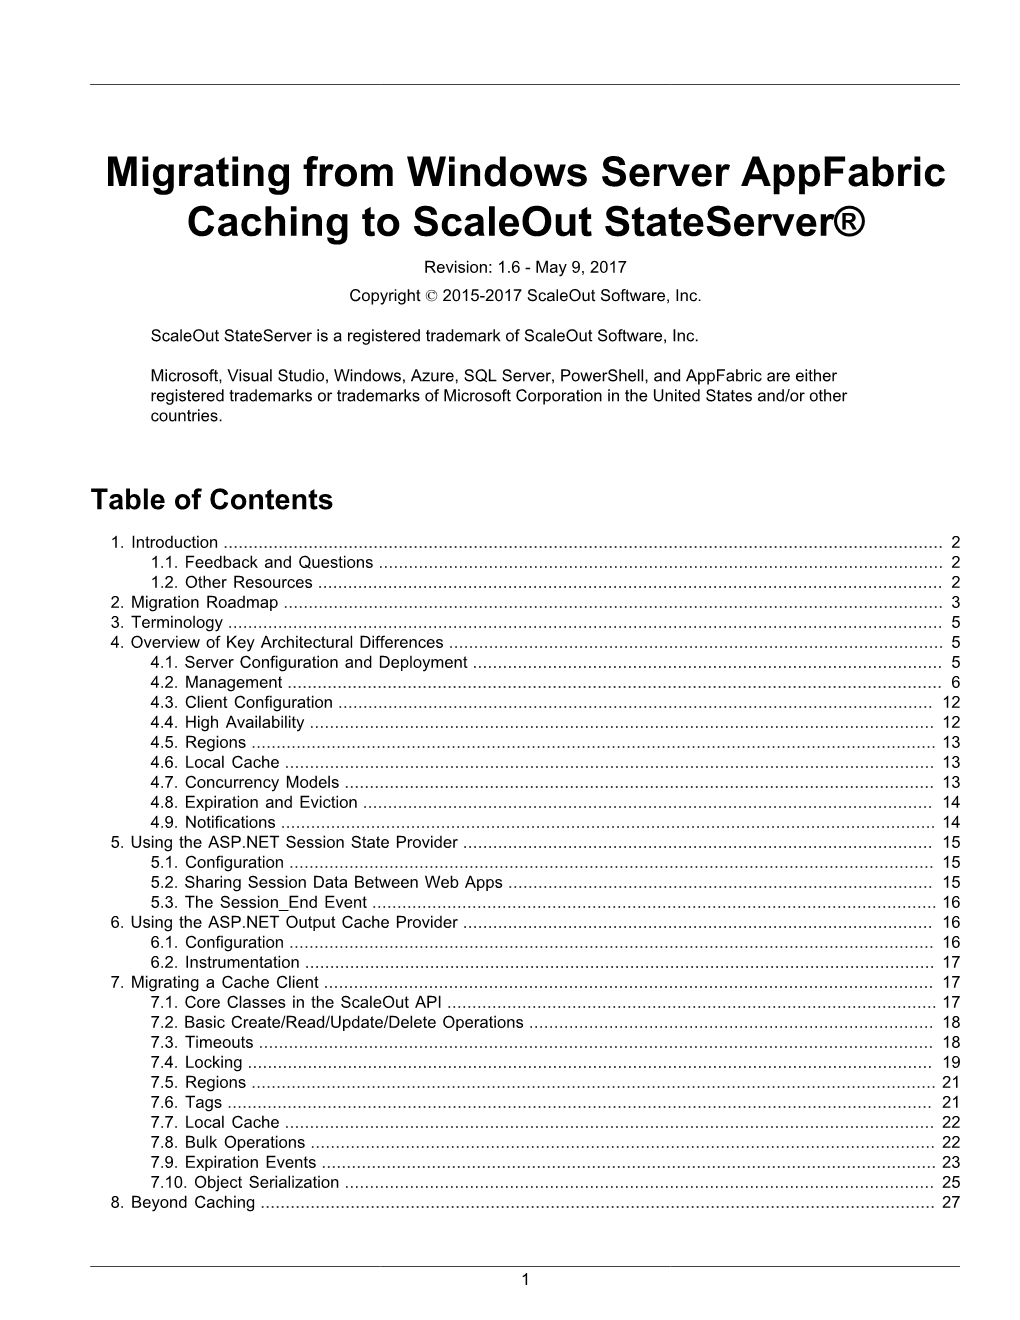 Migrating from Windows Server Appfabric Caching to Scaleout Stateserver® Revision: 1.6 - May 9, 2017 Copyright © 2015-2017 Scaleout Software, Inc